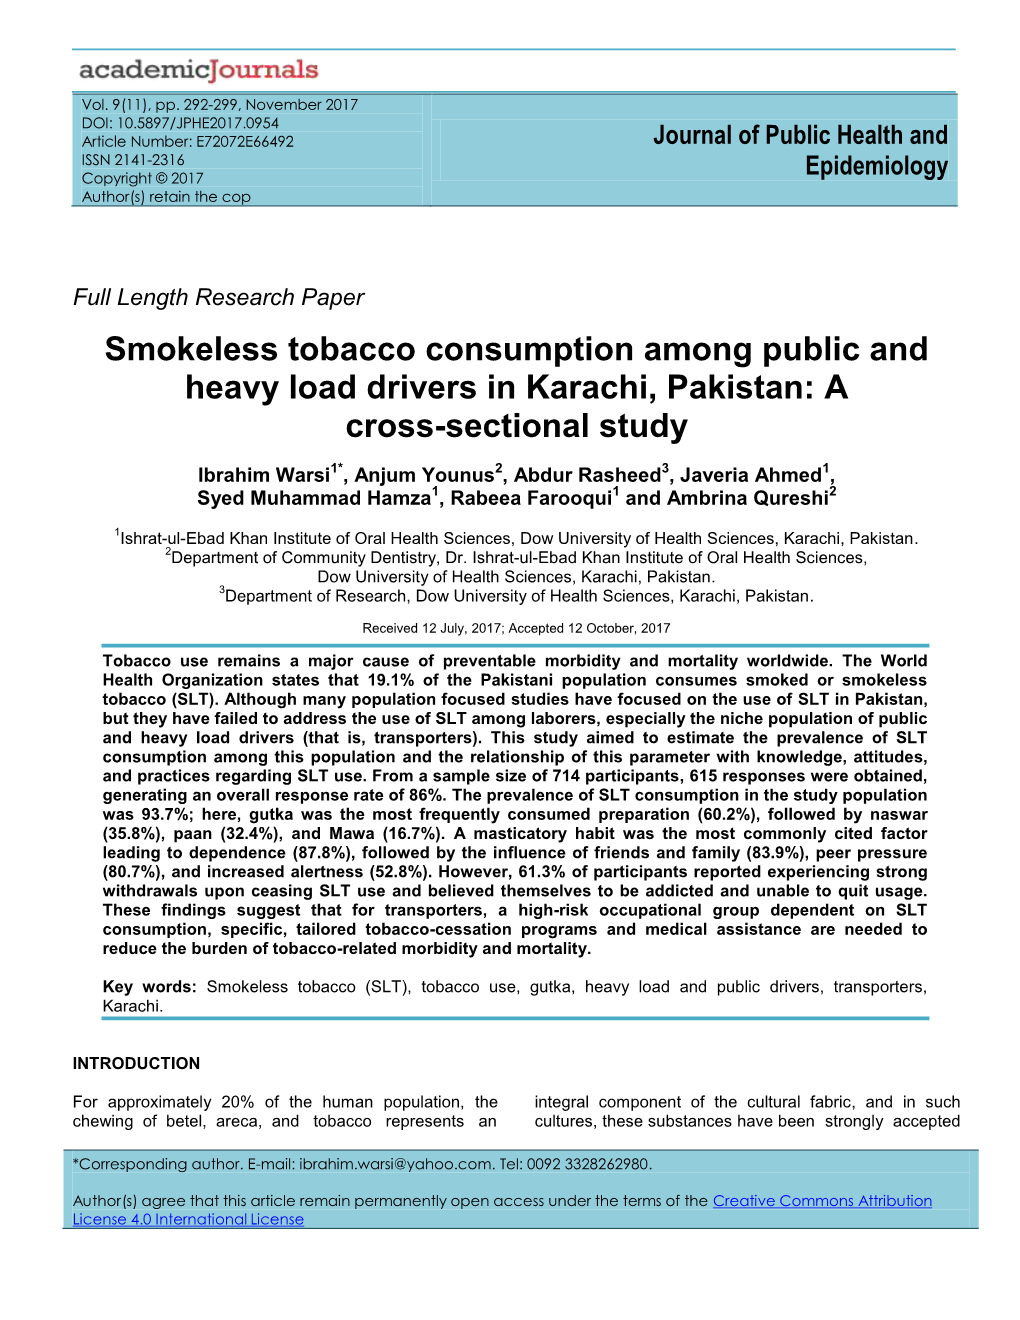 Smokeless Tobacco Consumption Among Public and Heavy Load Drivers in Karachi, Pakistan: a Cross-Sectional Study